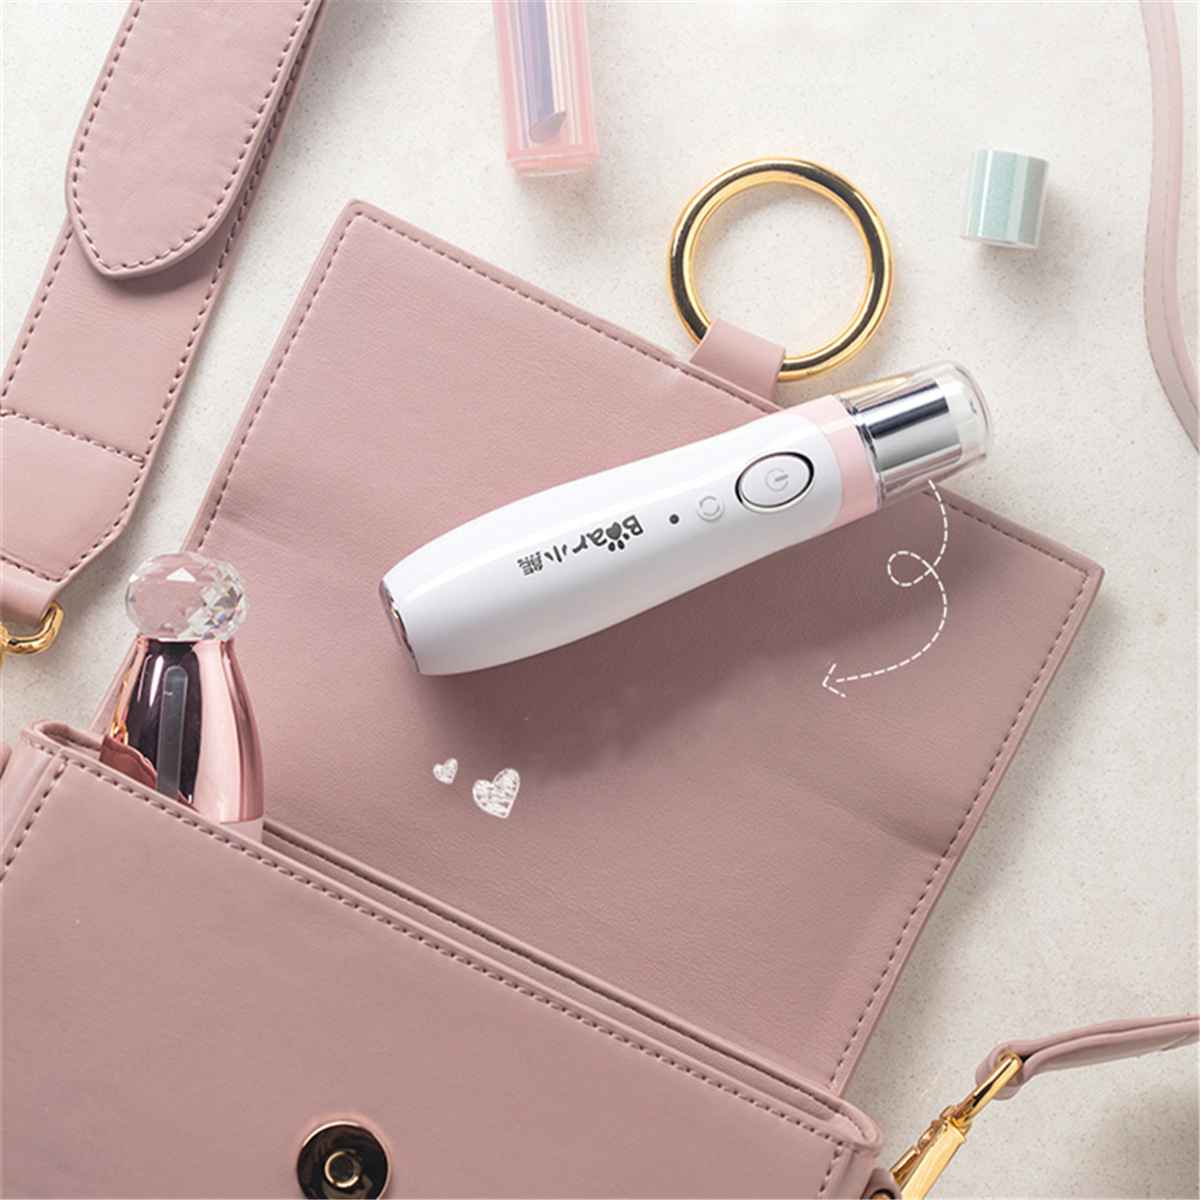 Rechargeable Electric Manicure Drill Nail File Bit Pedicure Machine Tool Electronic Foot Files Personal Care Appliance 2W 3.7V